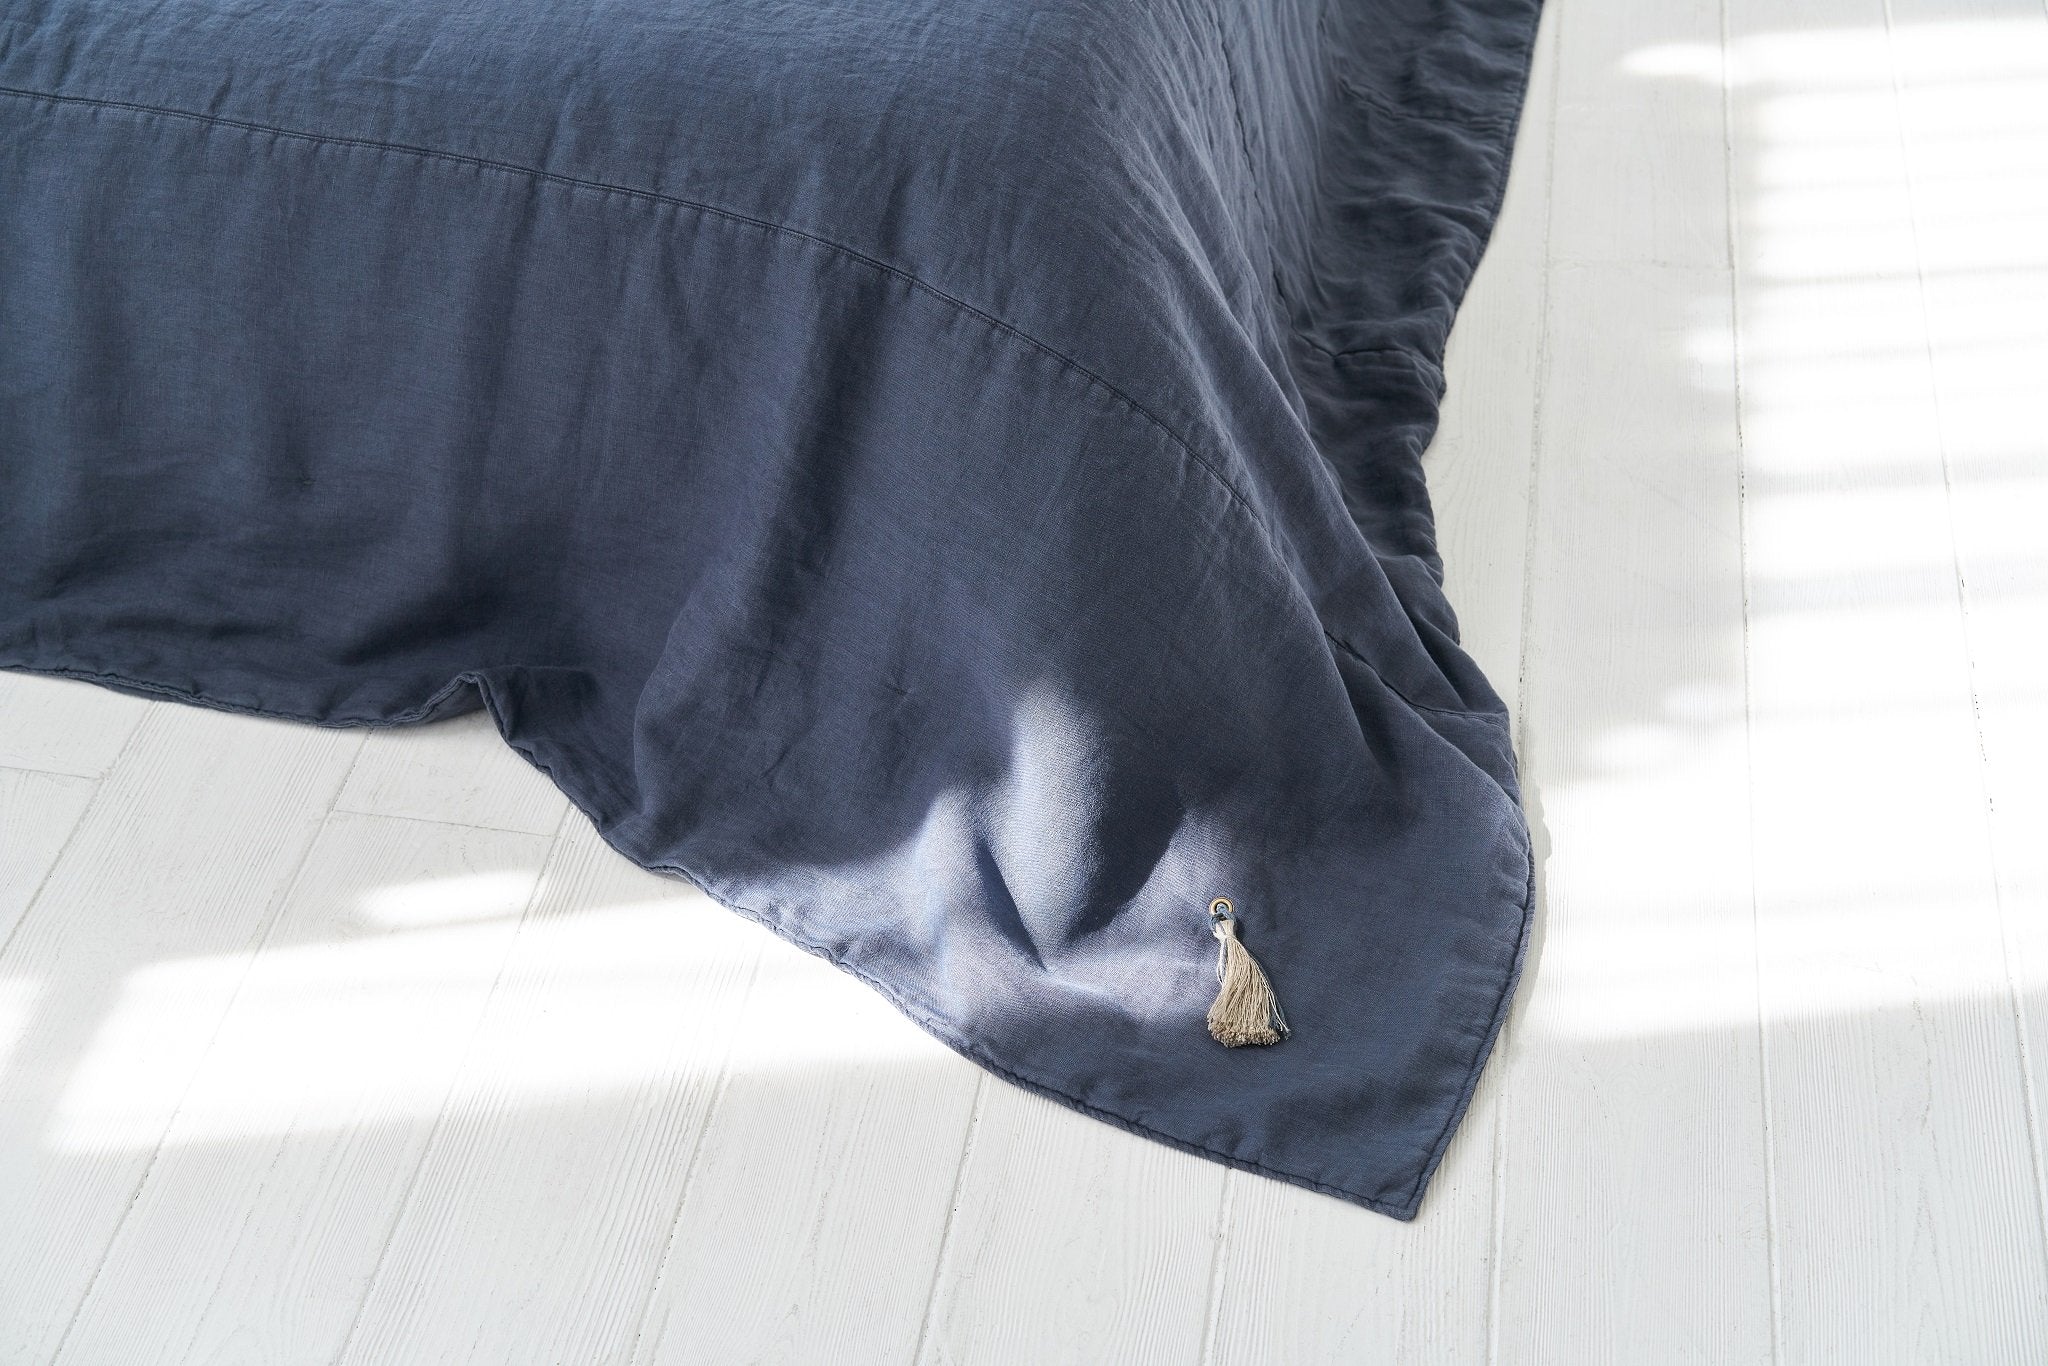 Double, Quilted, Stone Washed Linen Bed Spread Cover In Denim Blue